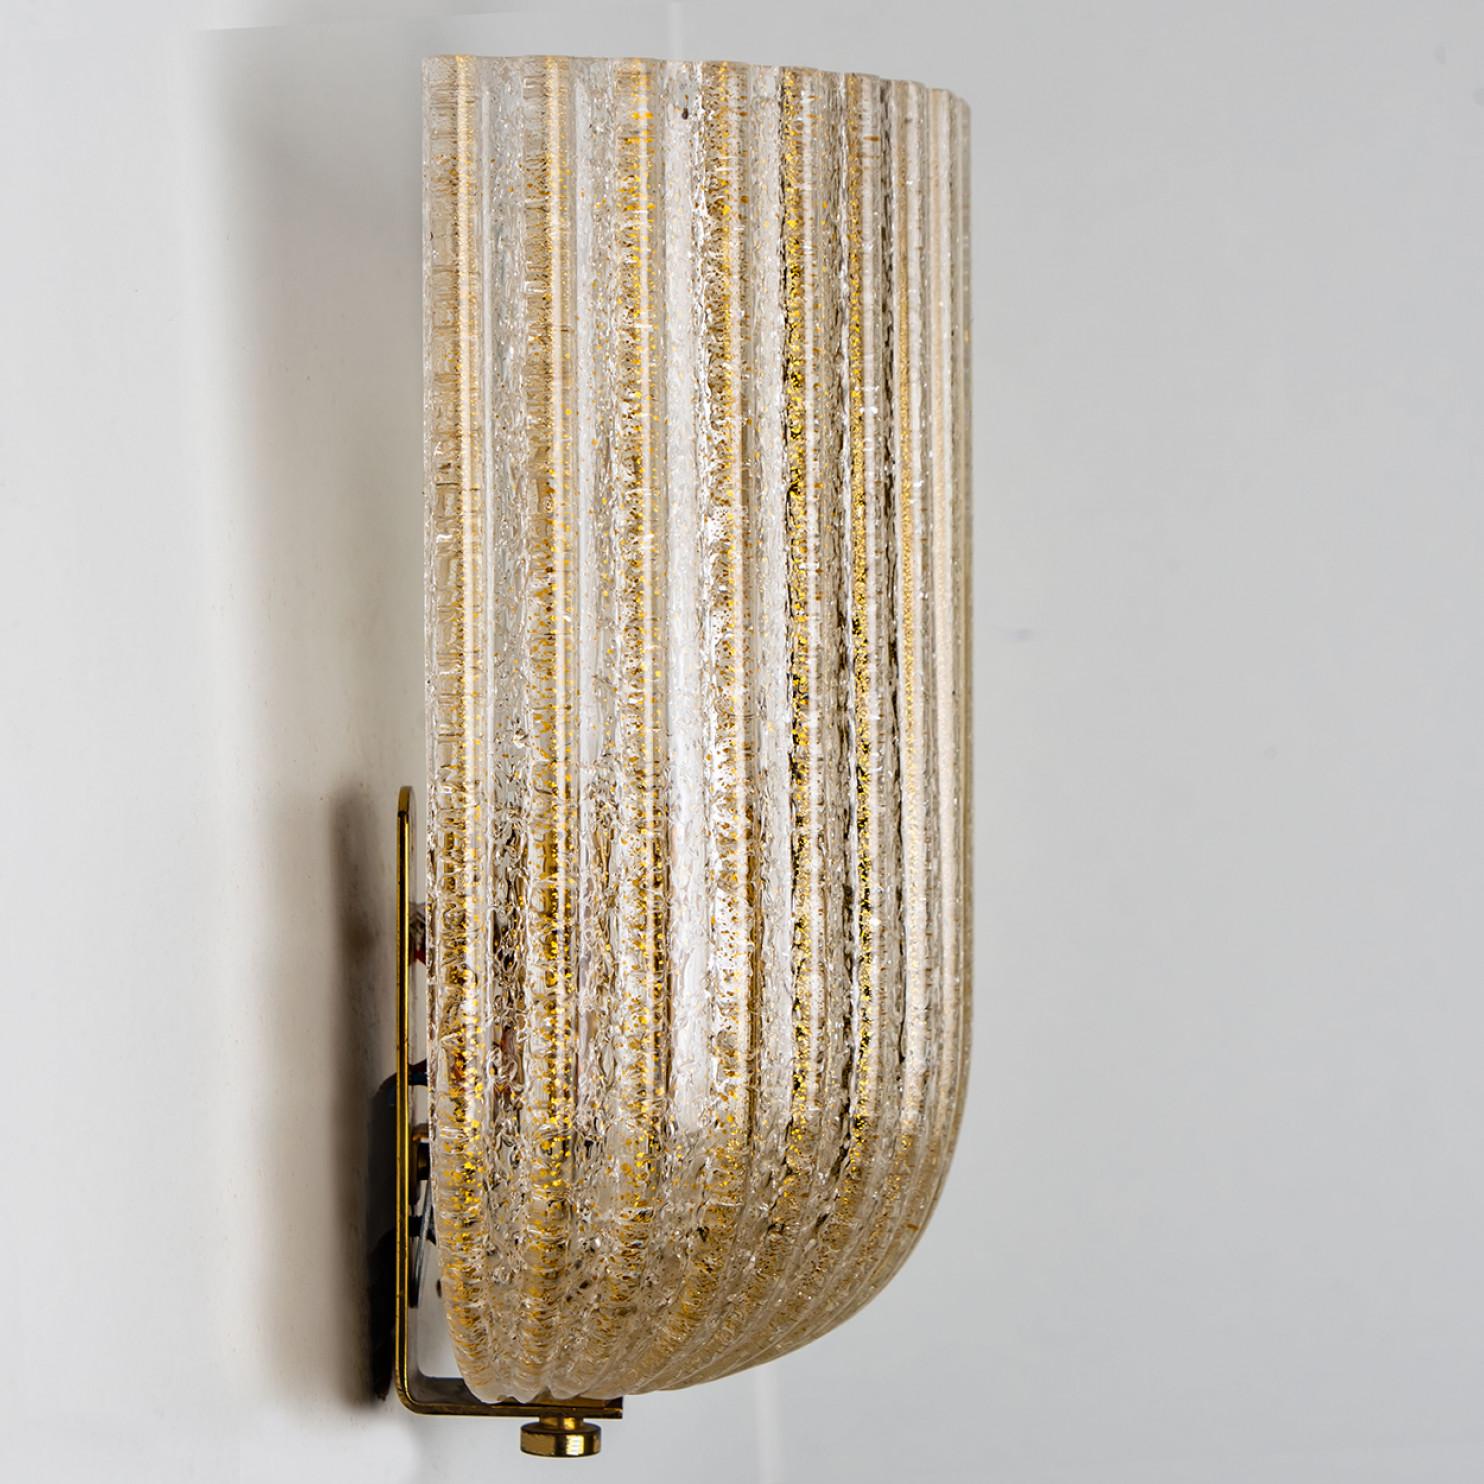 1 of 2 Fluted Murano Glass Wall Sconces Barovier, Italy, 1960s 1